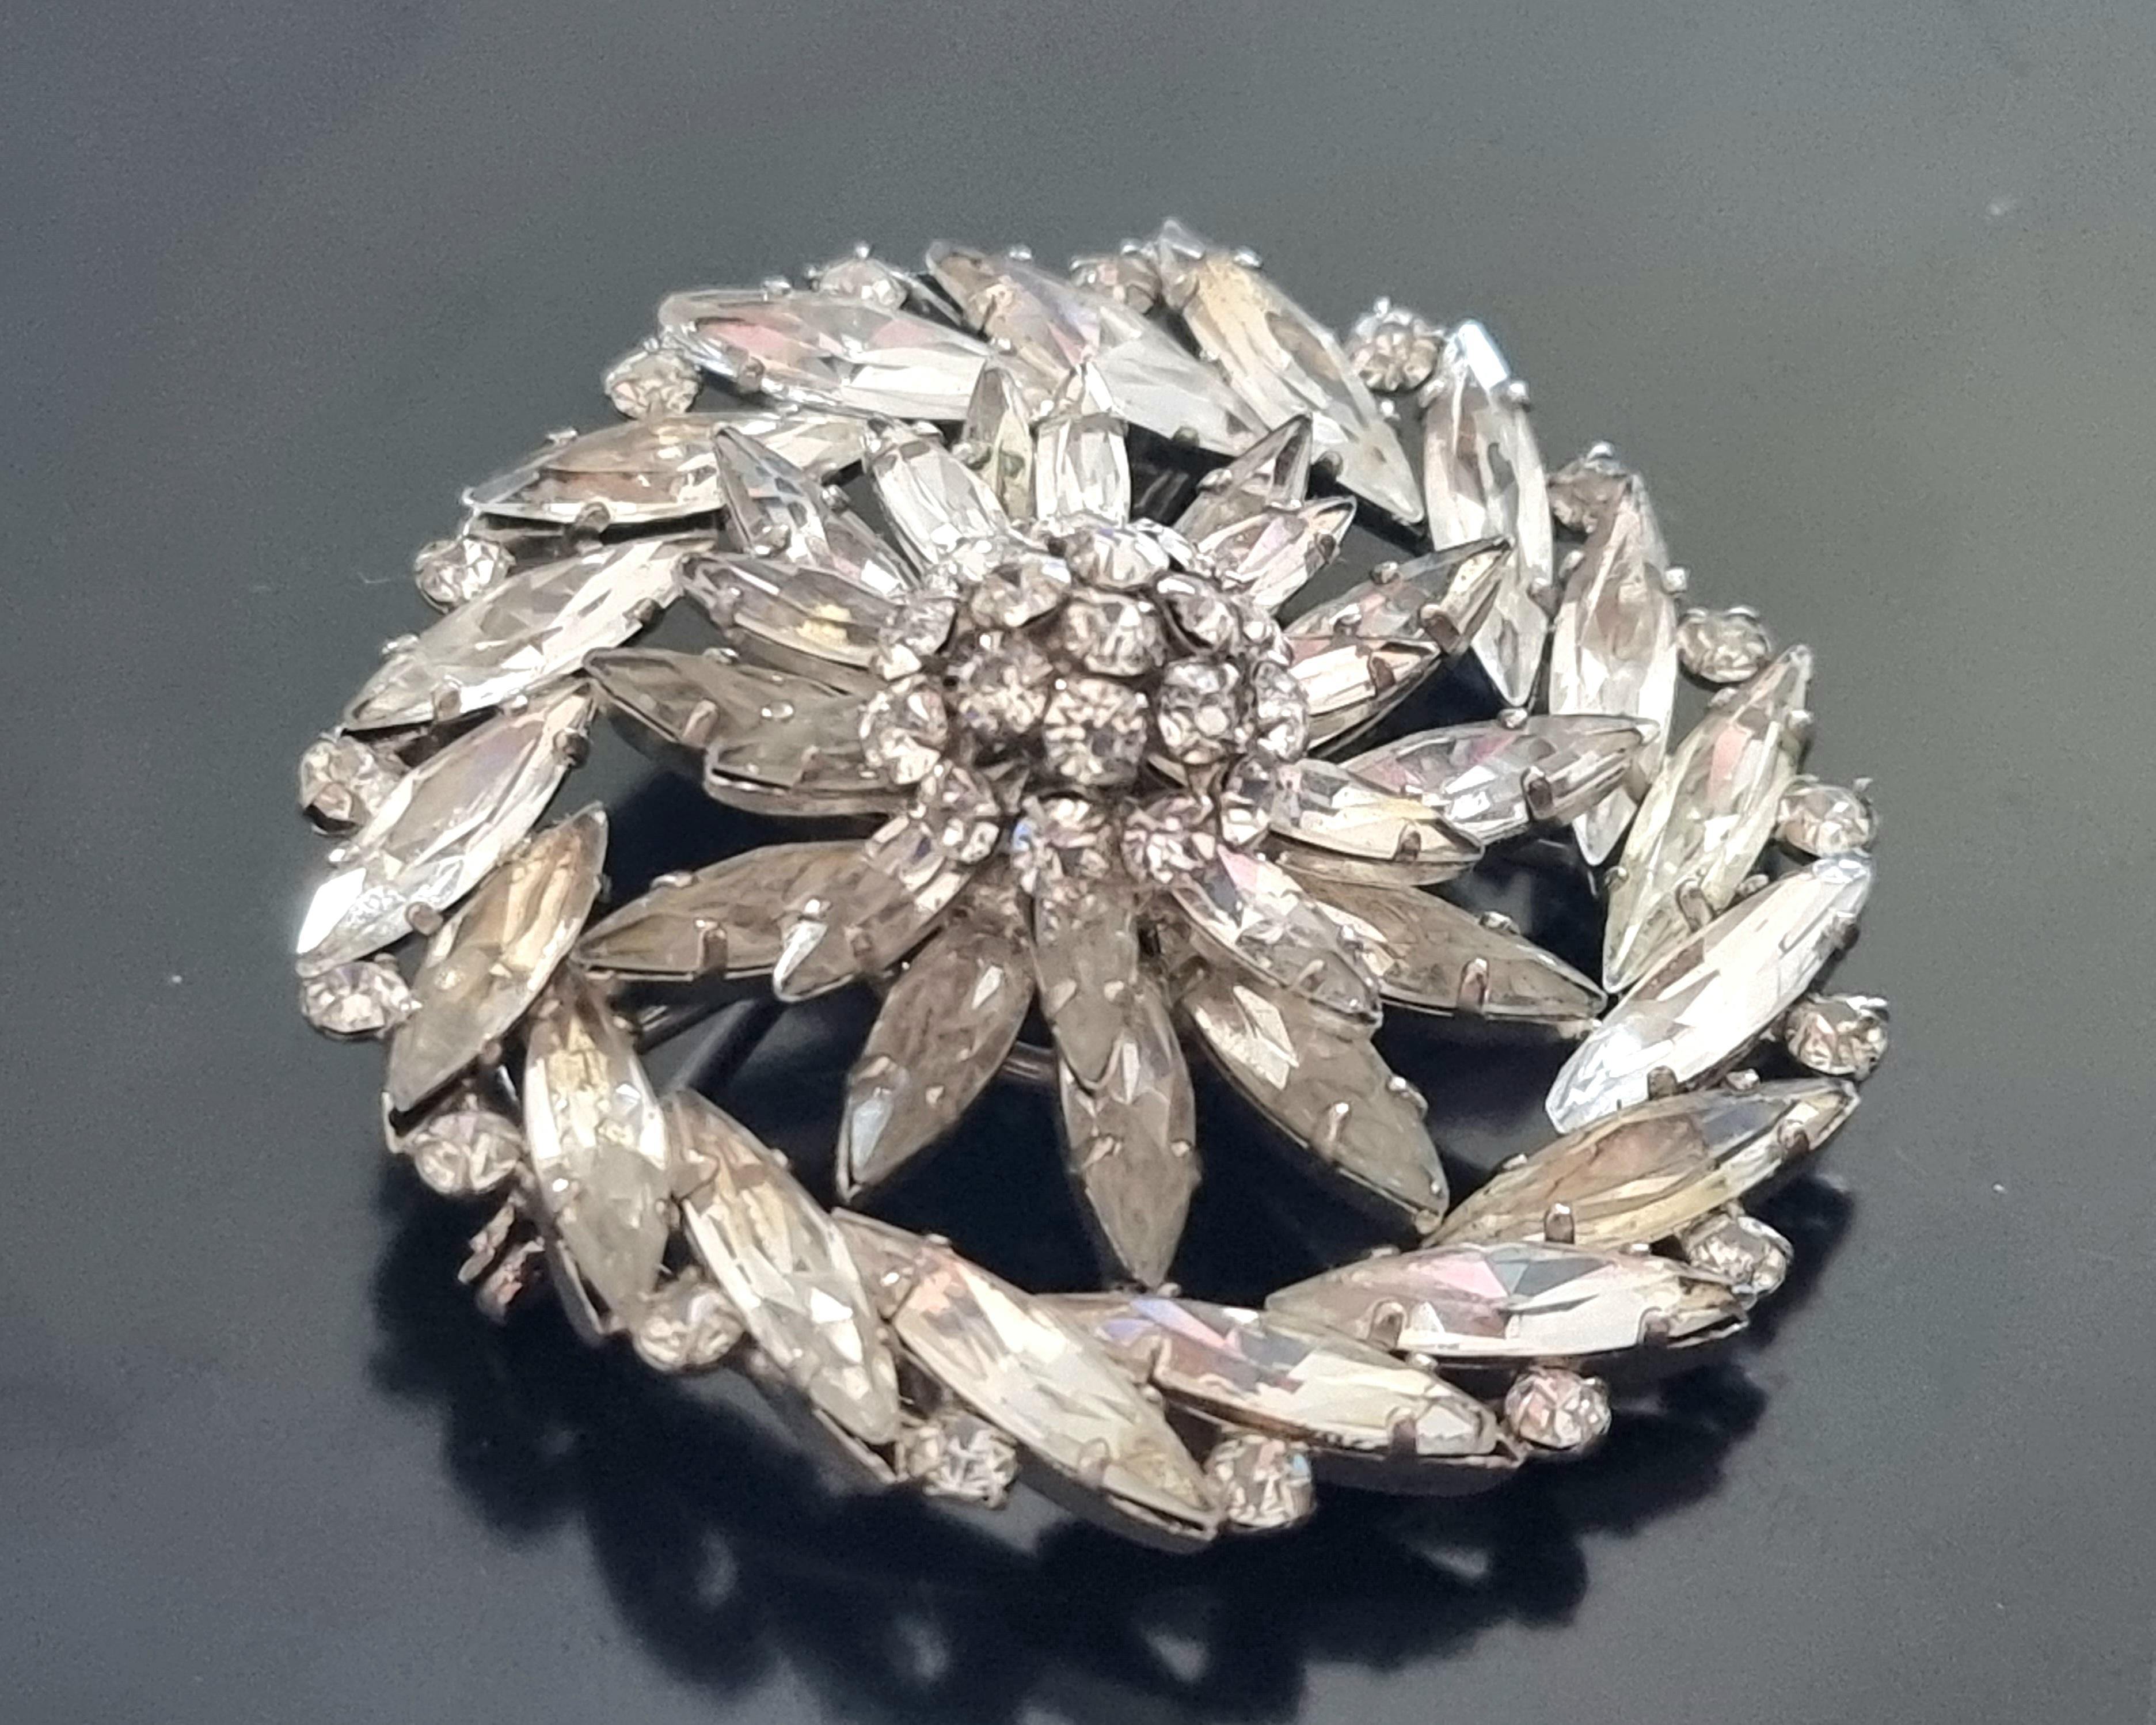 Magnificent old BROOCH,
vintage 50's,
in silver metal, glass rhinestones,
by Haute Couture designer ROGER Jean Pierre,
dimensions 5 x 5 cm, weight 22 g,
good condition.

The jeweler and designer, famous French parurier ROGER Jean Pierre has been